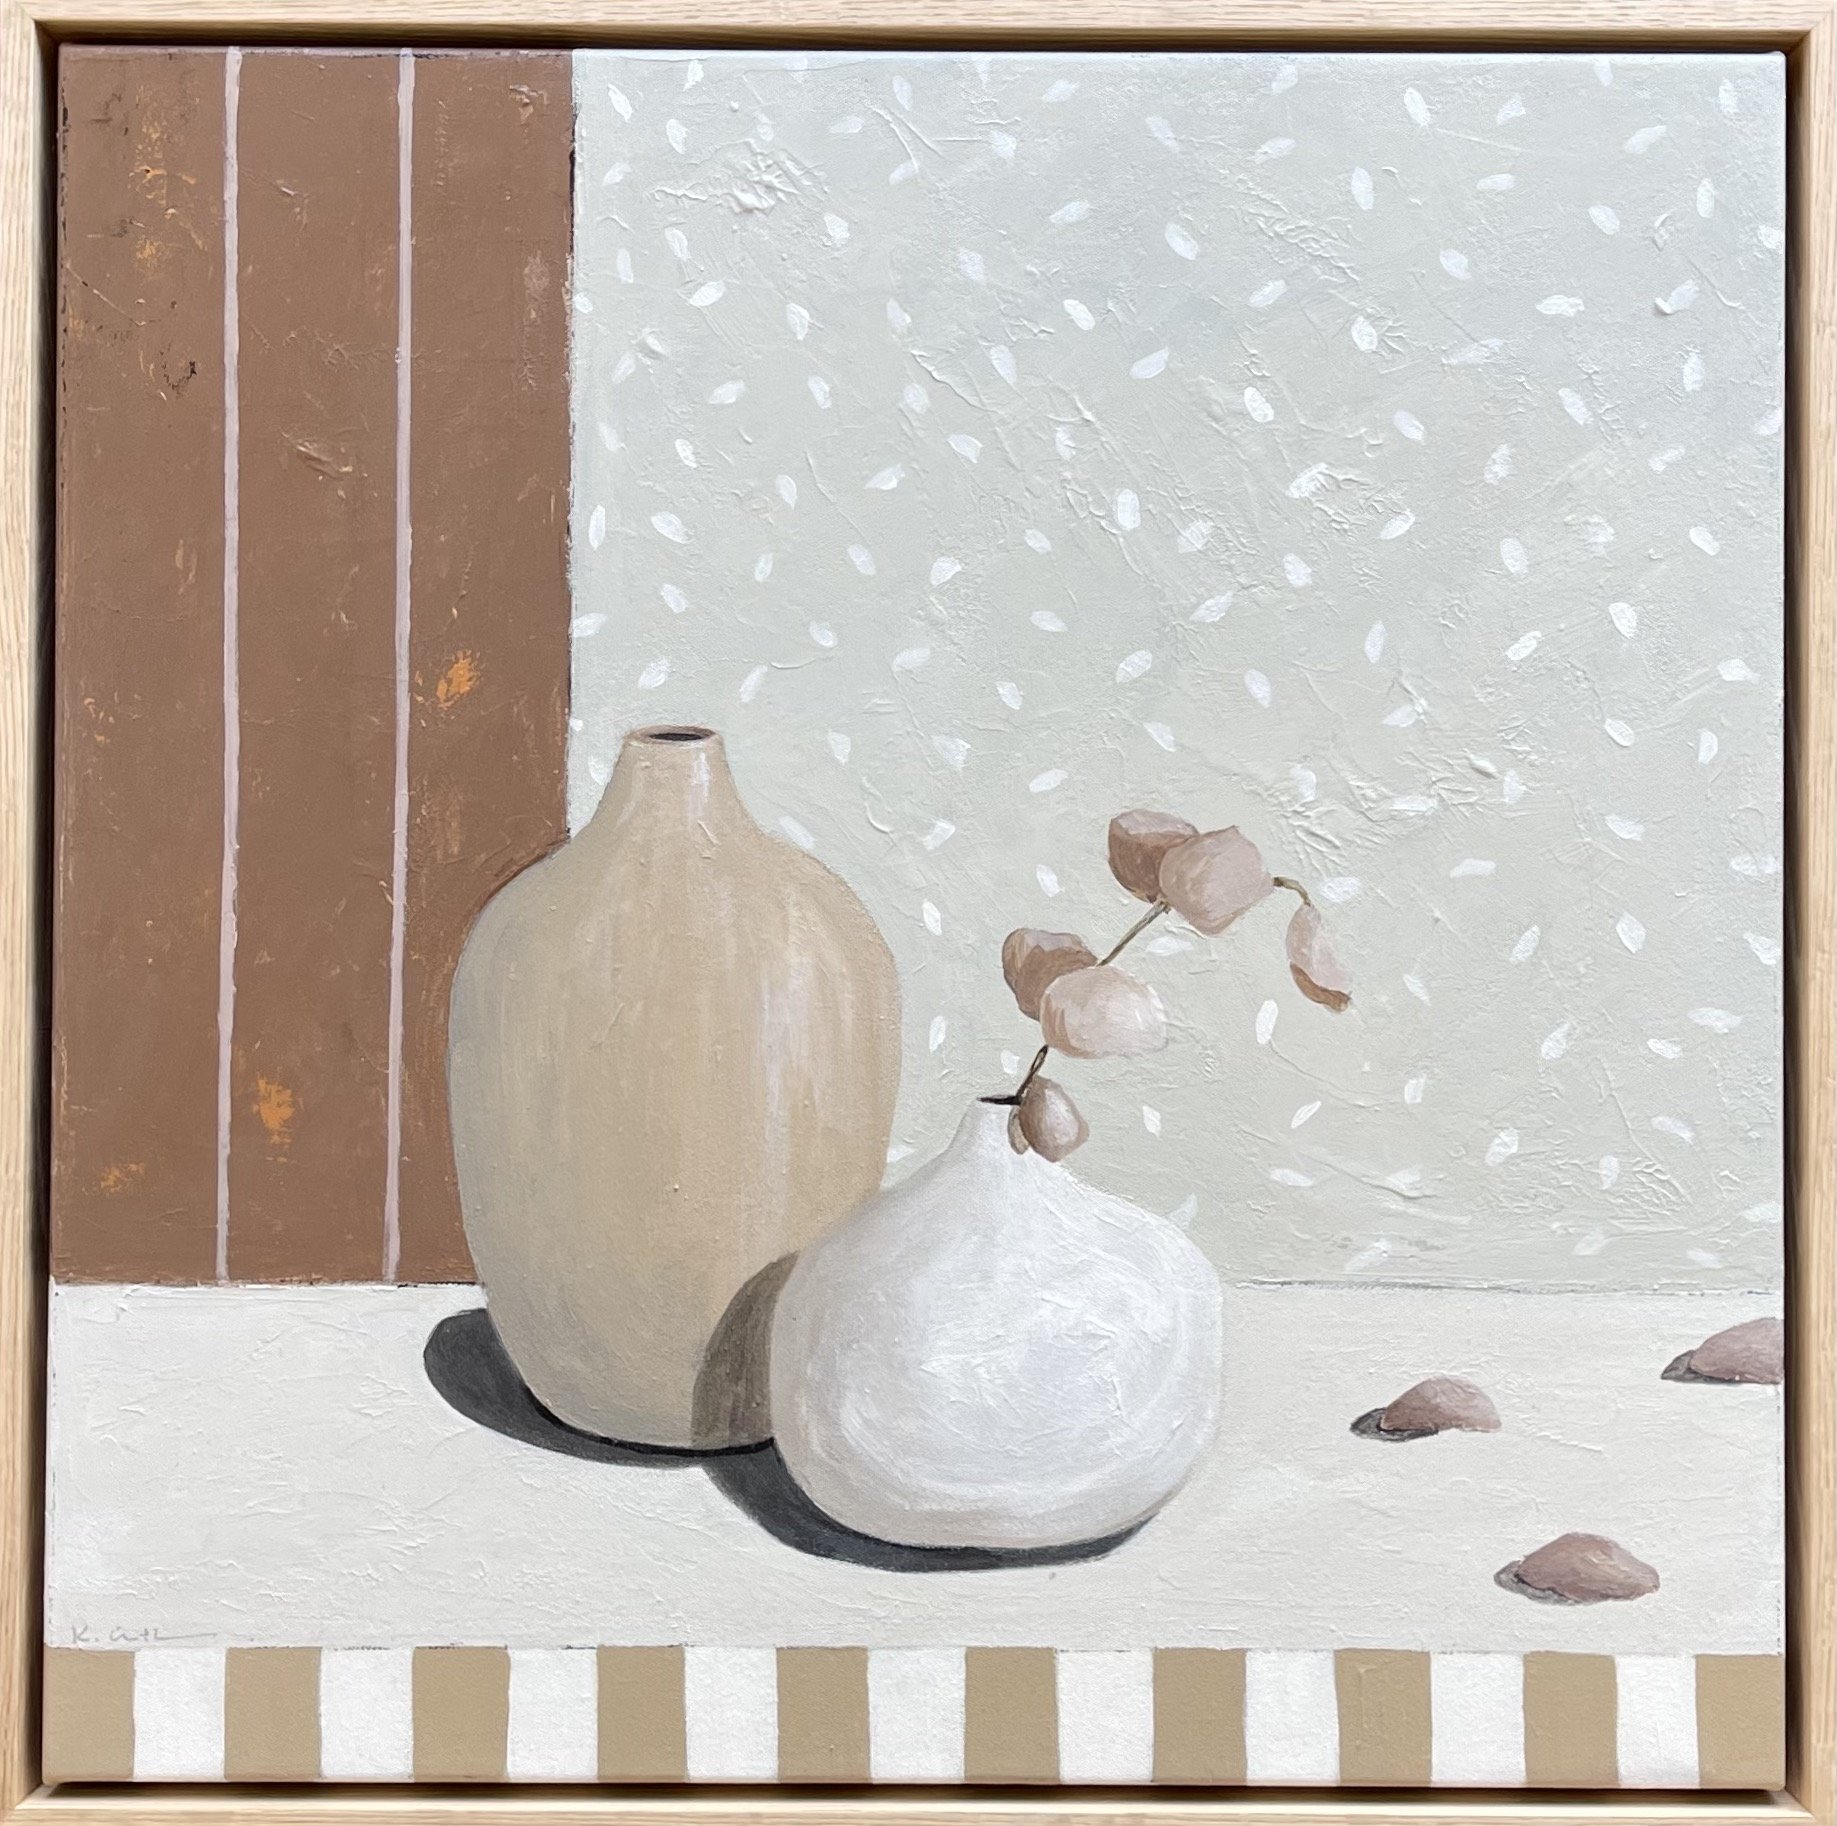 Dried Leaves In White Vase 50x50cm framed acrylic on canvas $990